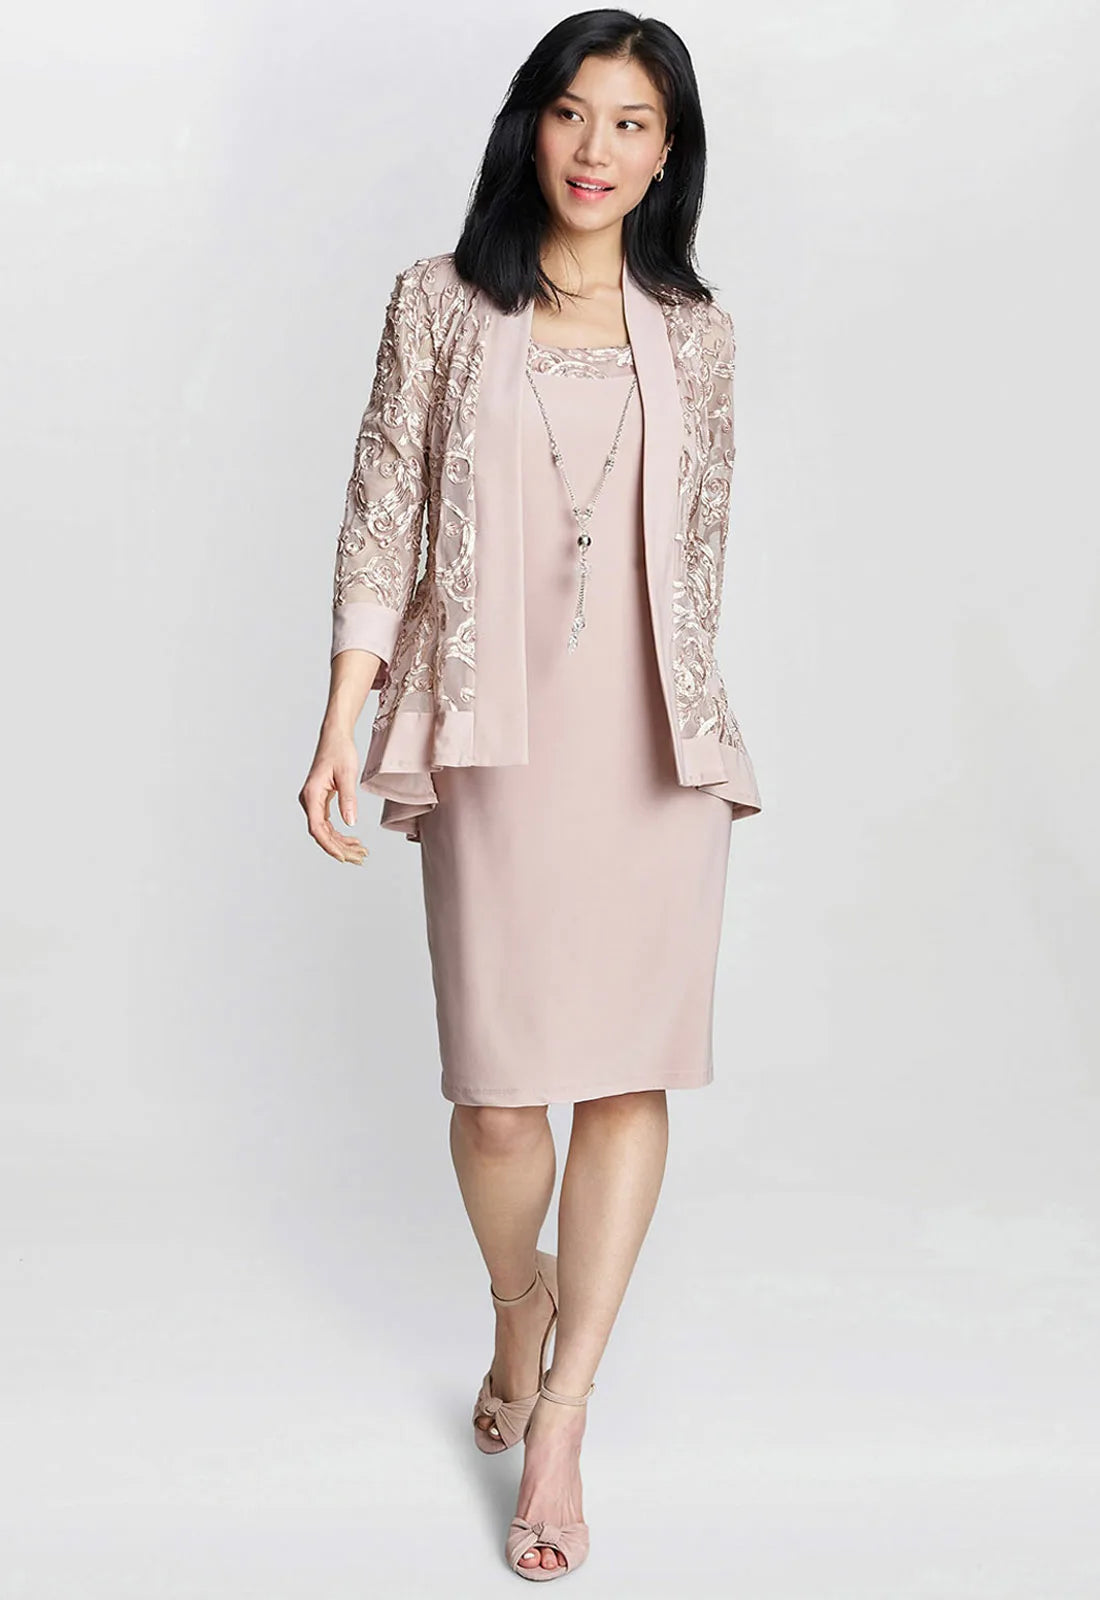 Gina Bacconi Blush Beverley Dress and Jacket with necklace